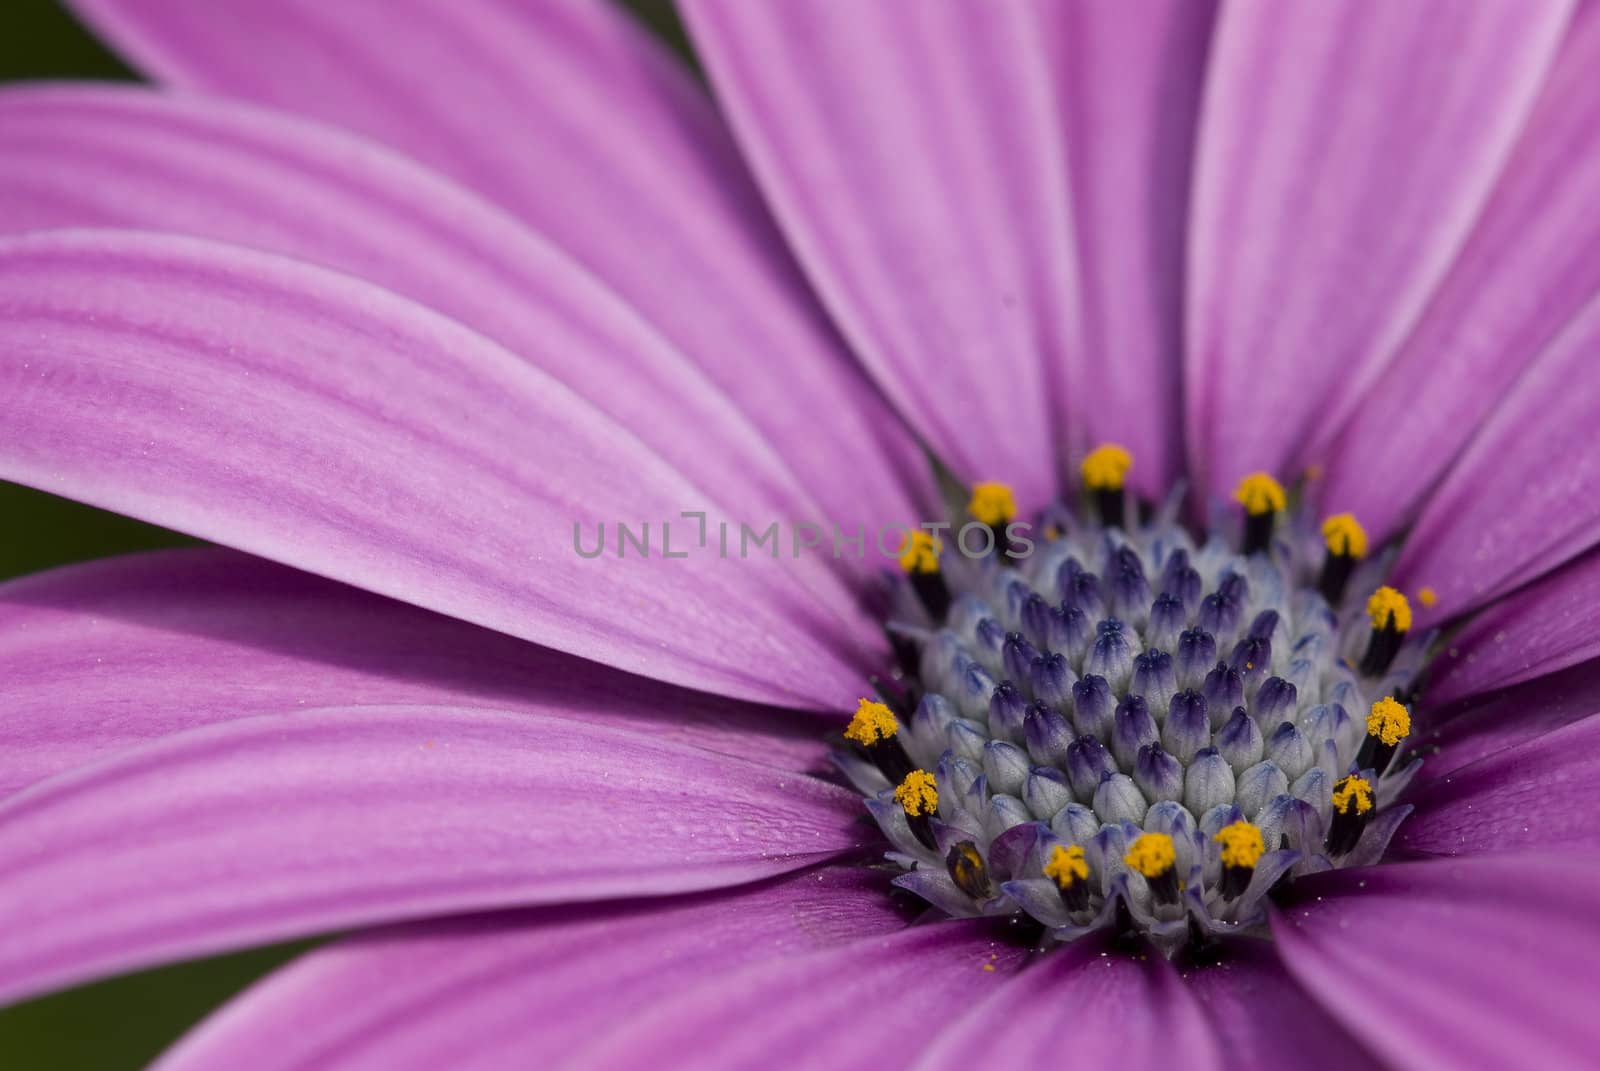 Closeup of a purple daisy with yellow flowers inside